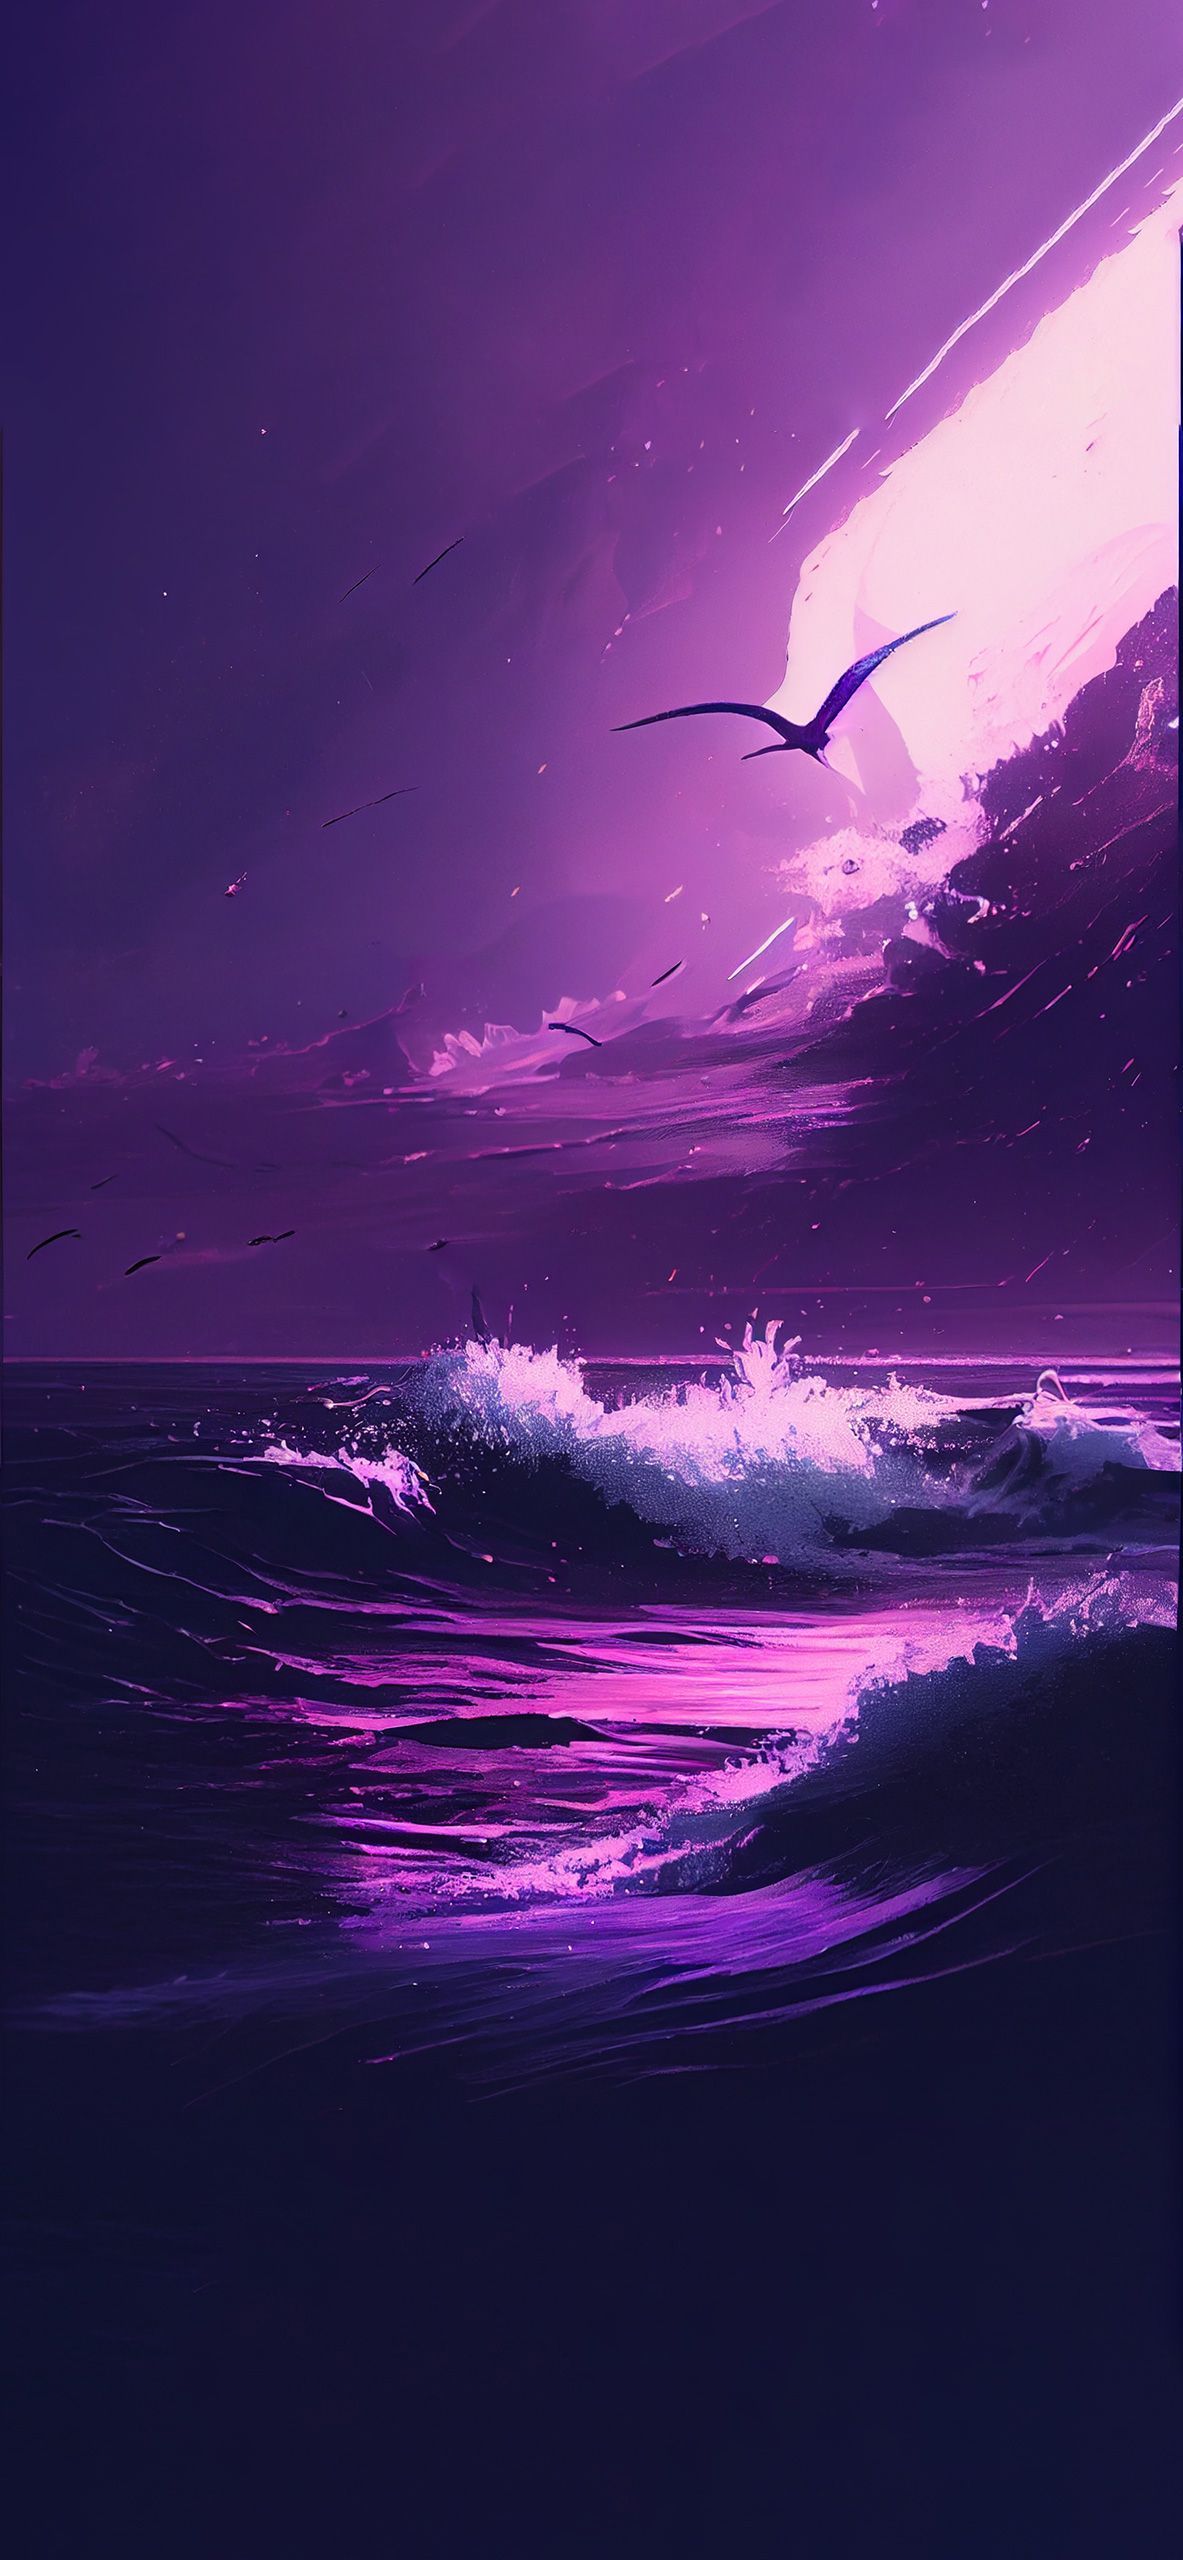 A purple sky with waves and birds - Profile picture, purple, violet